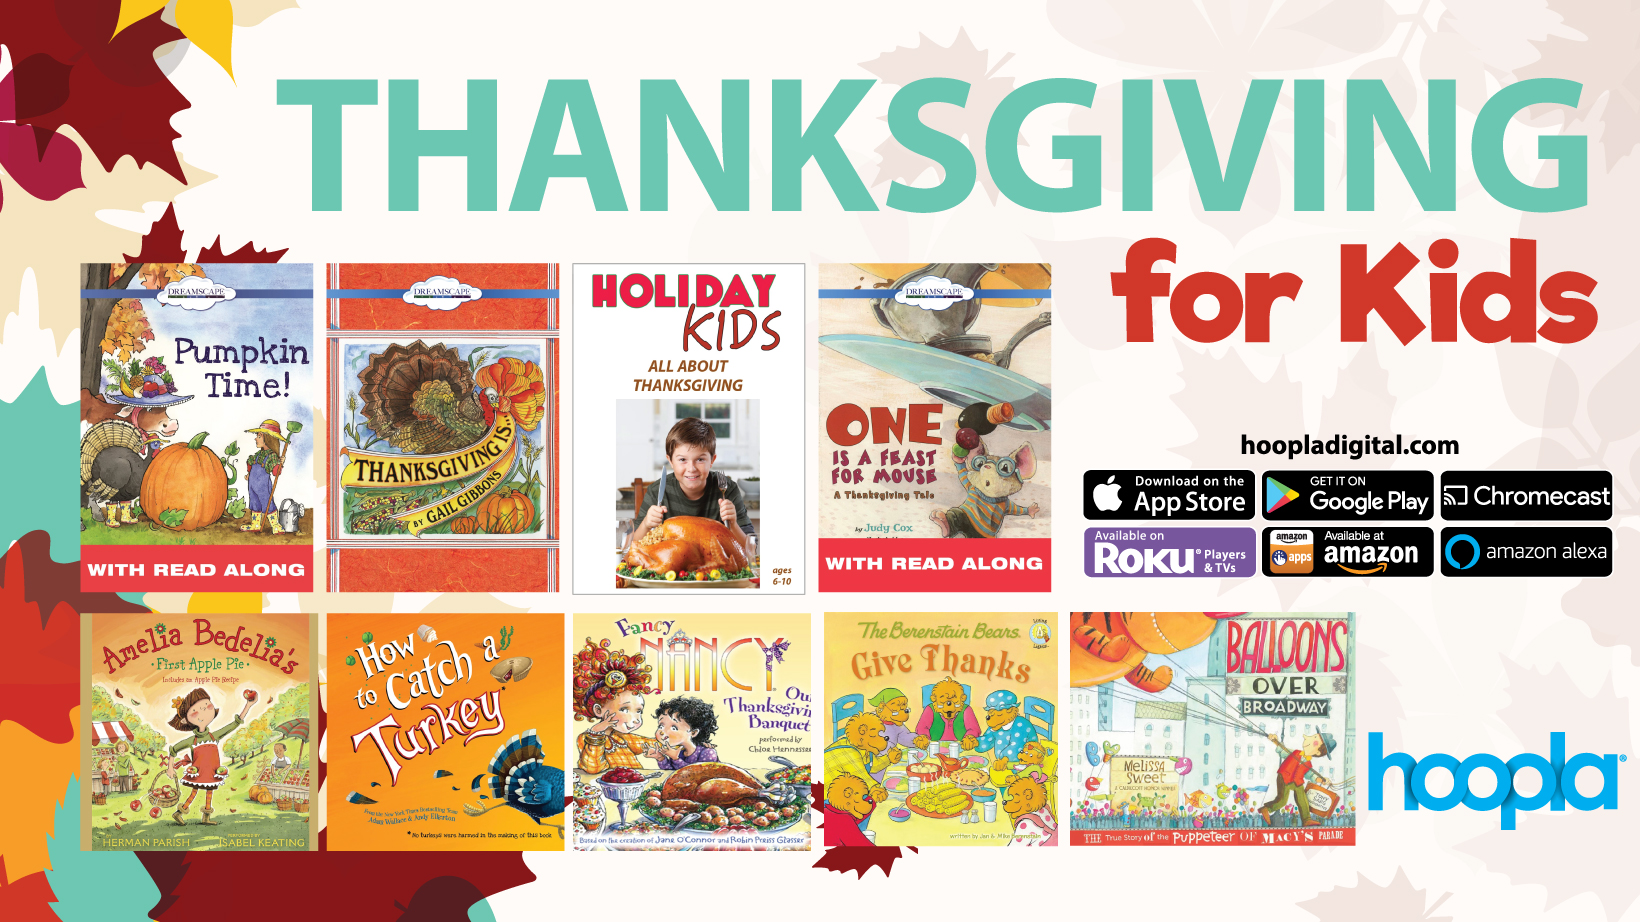 Thanksgiving for Kids: Hoopla